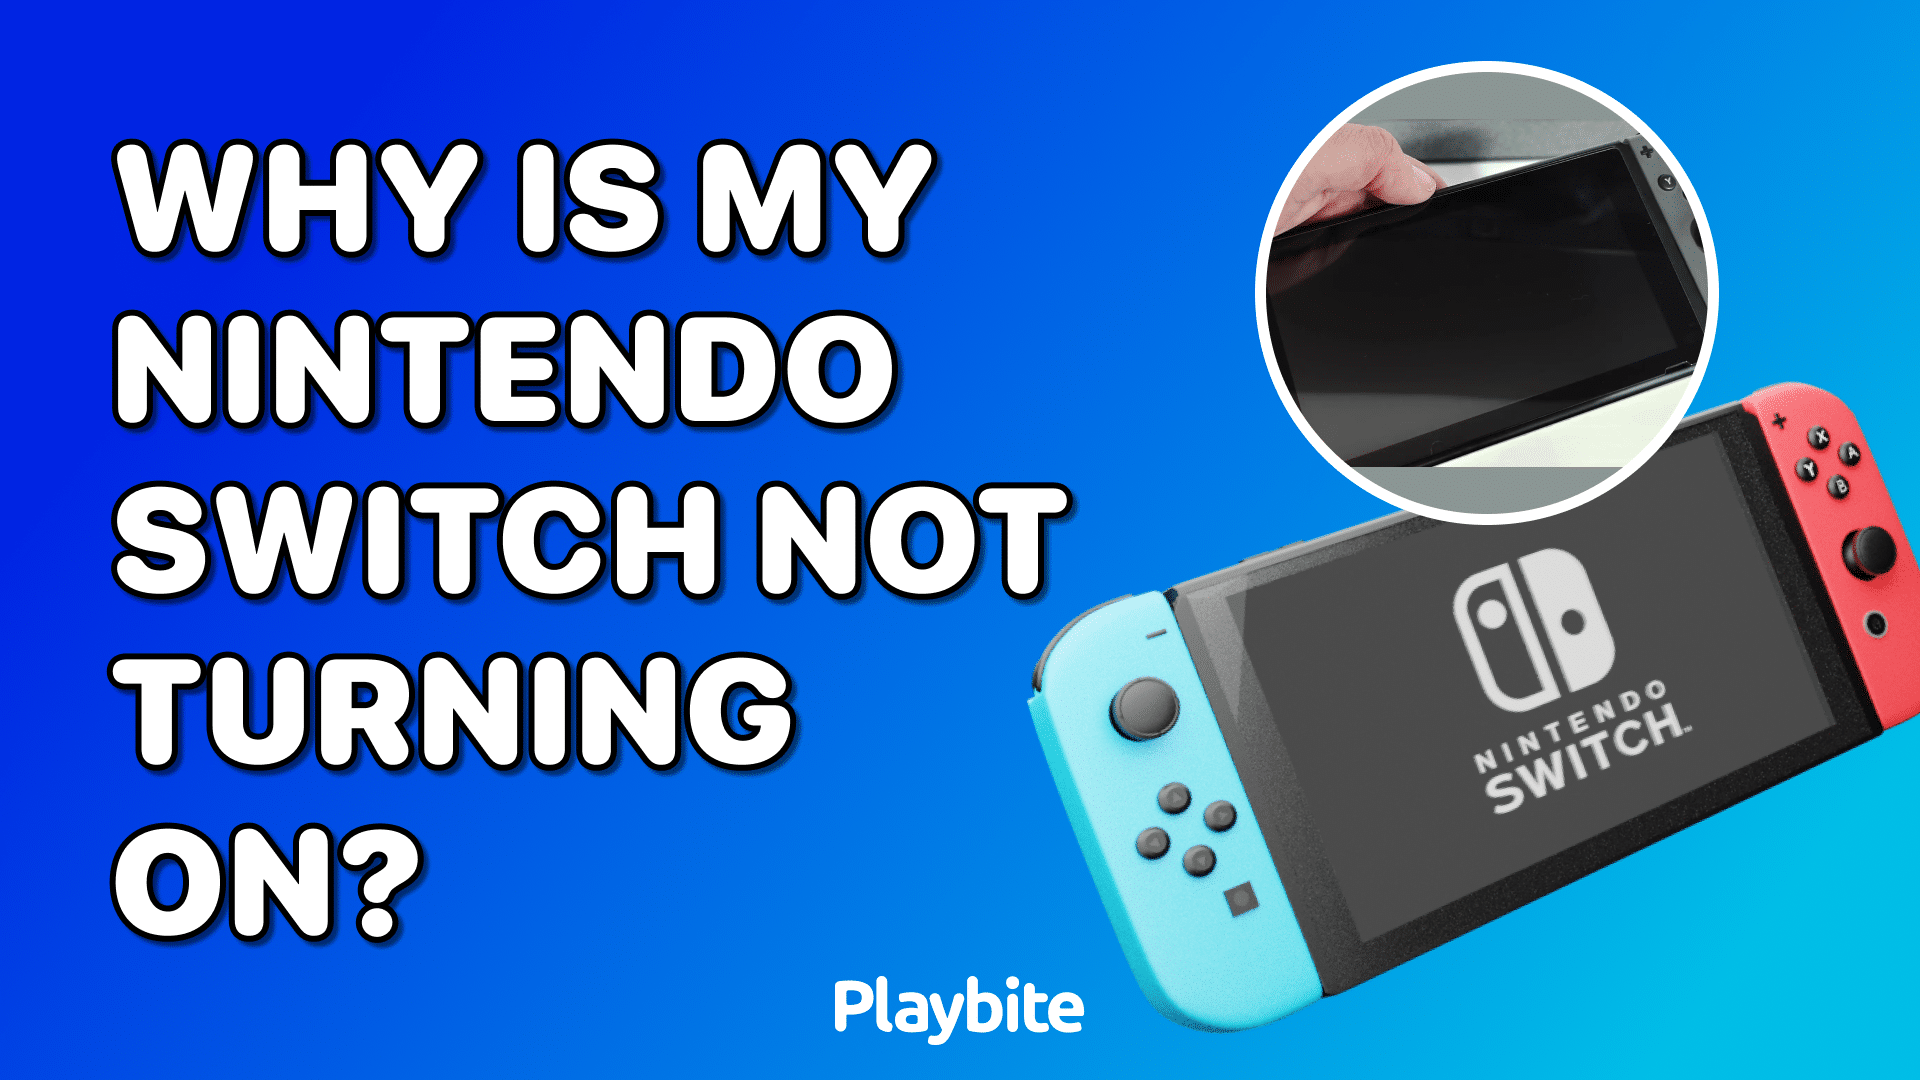 Why Is My Nintendo Switch Not Turning On?